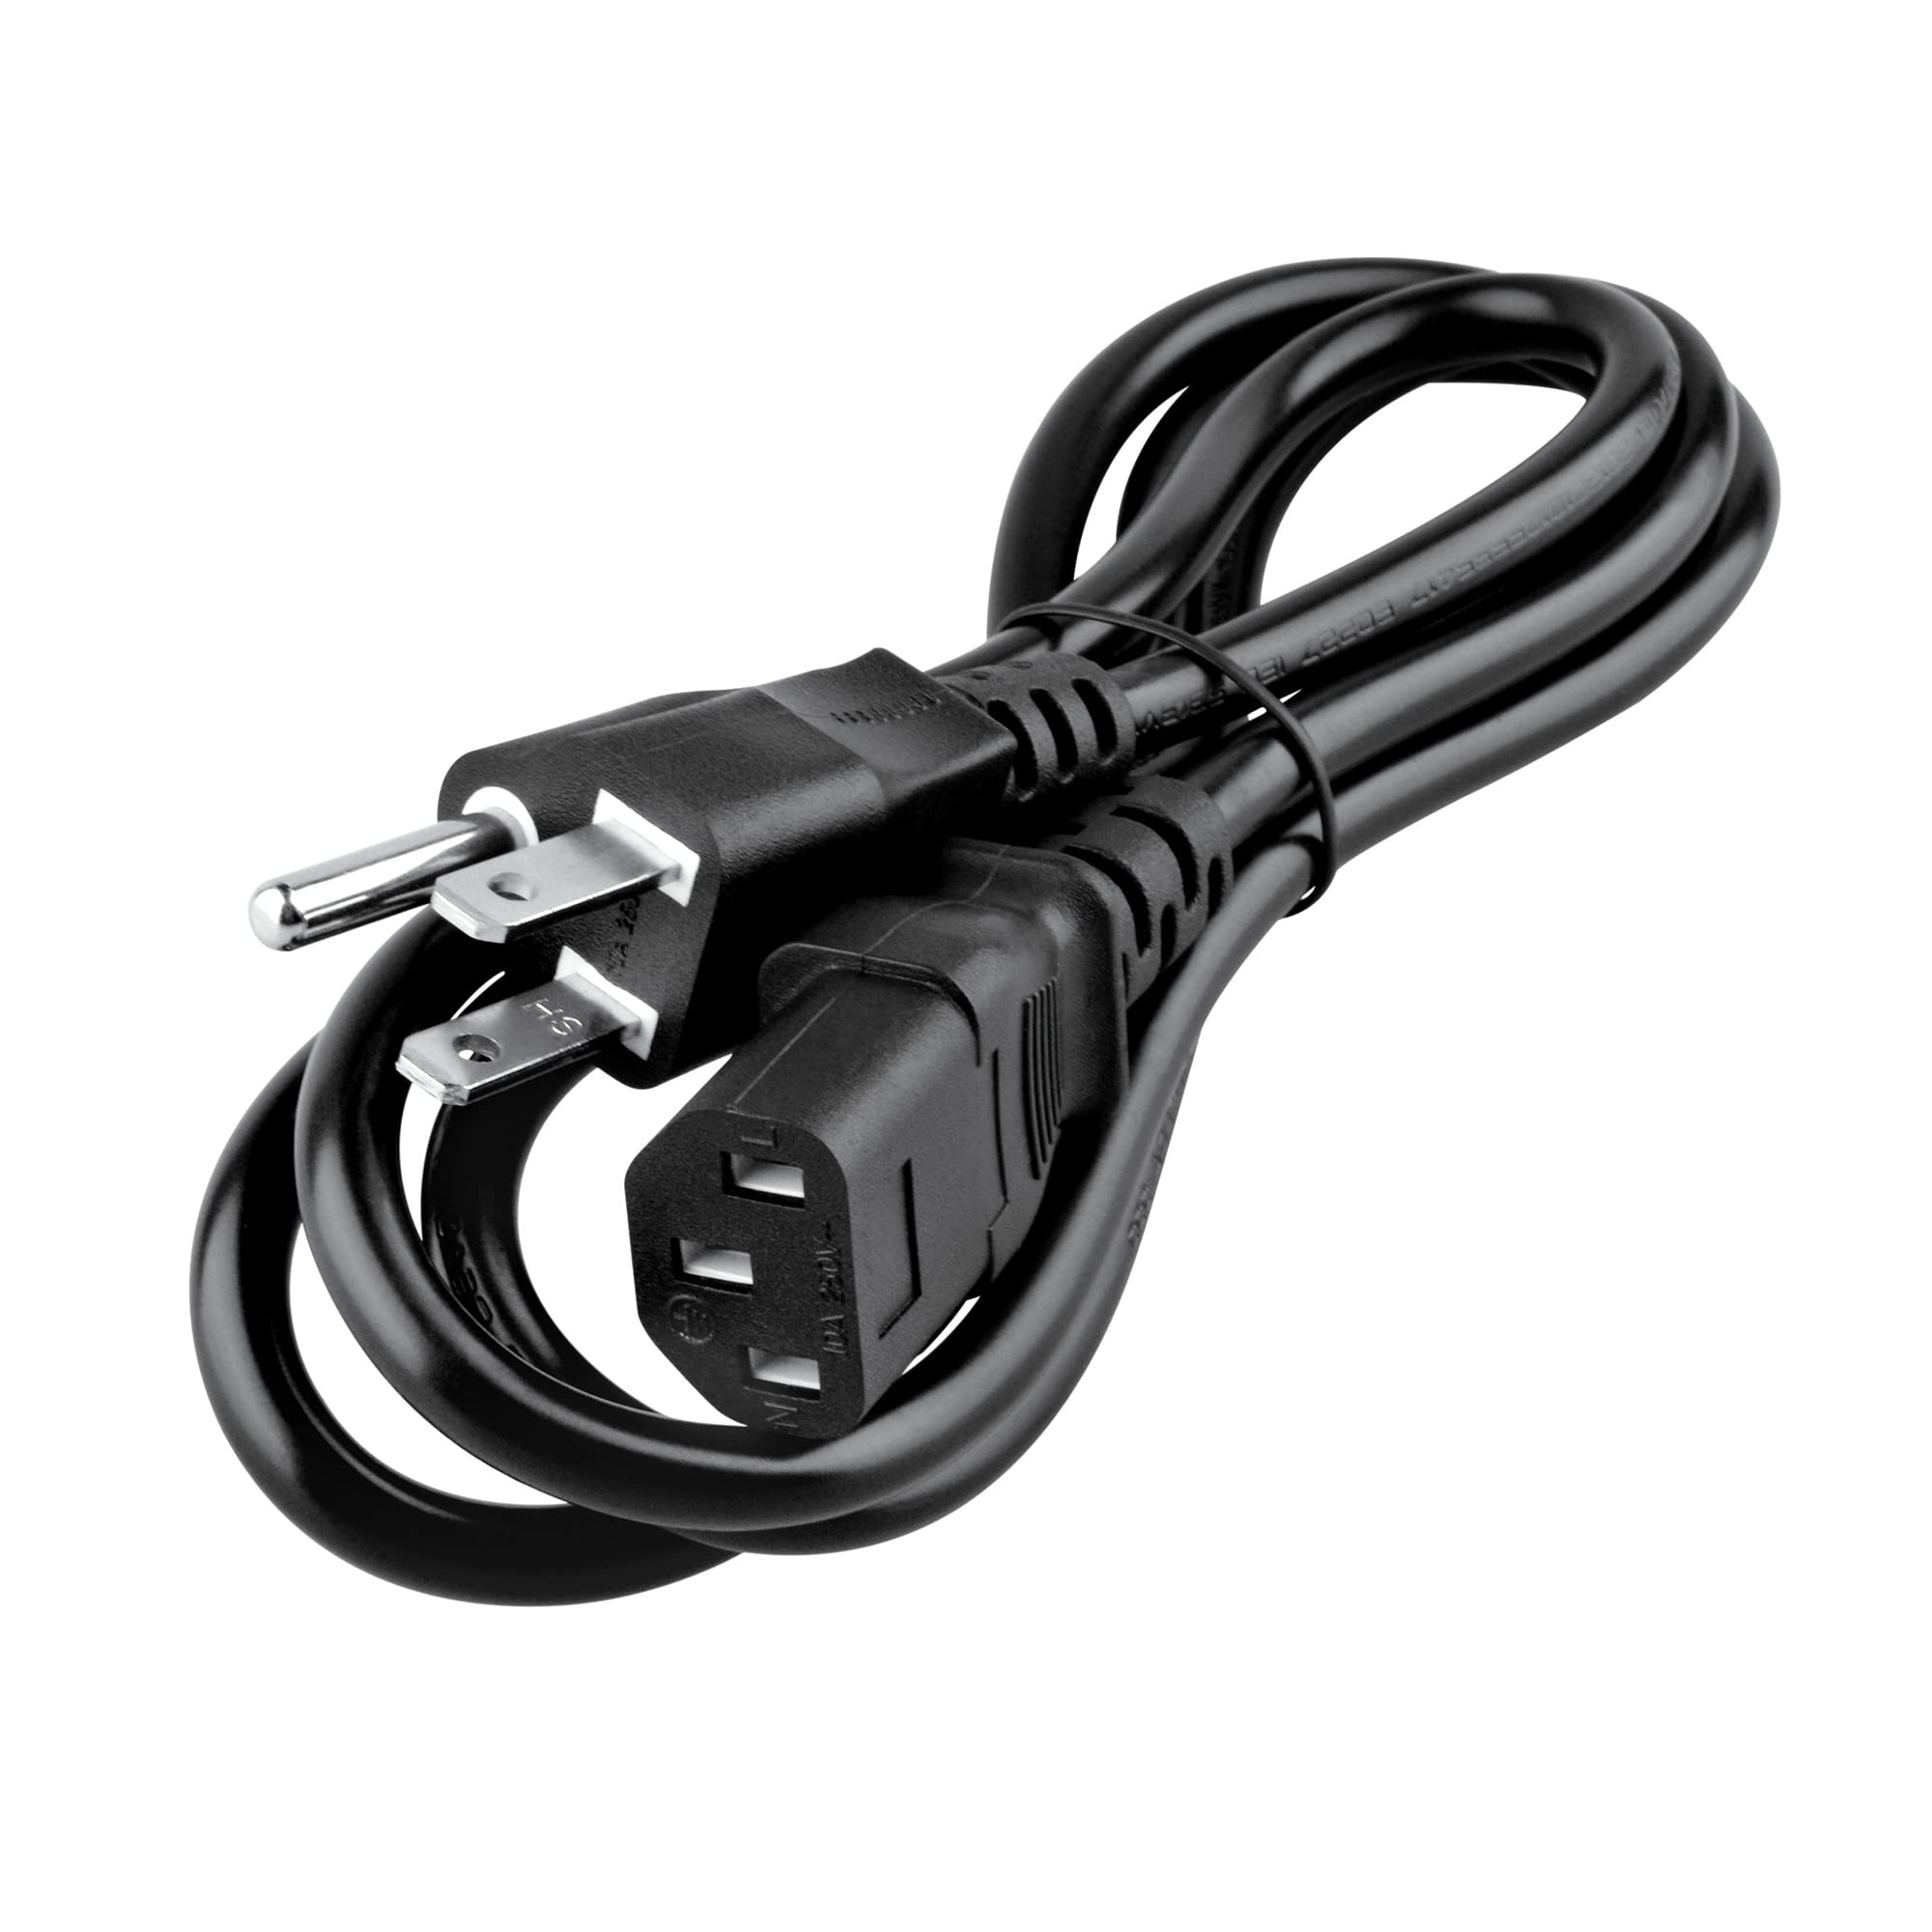 kybate 5ft AC Power Cord Cable Lead for Zojirushi NS-VGC05 5.5-Cup Micom Rice Cooker